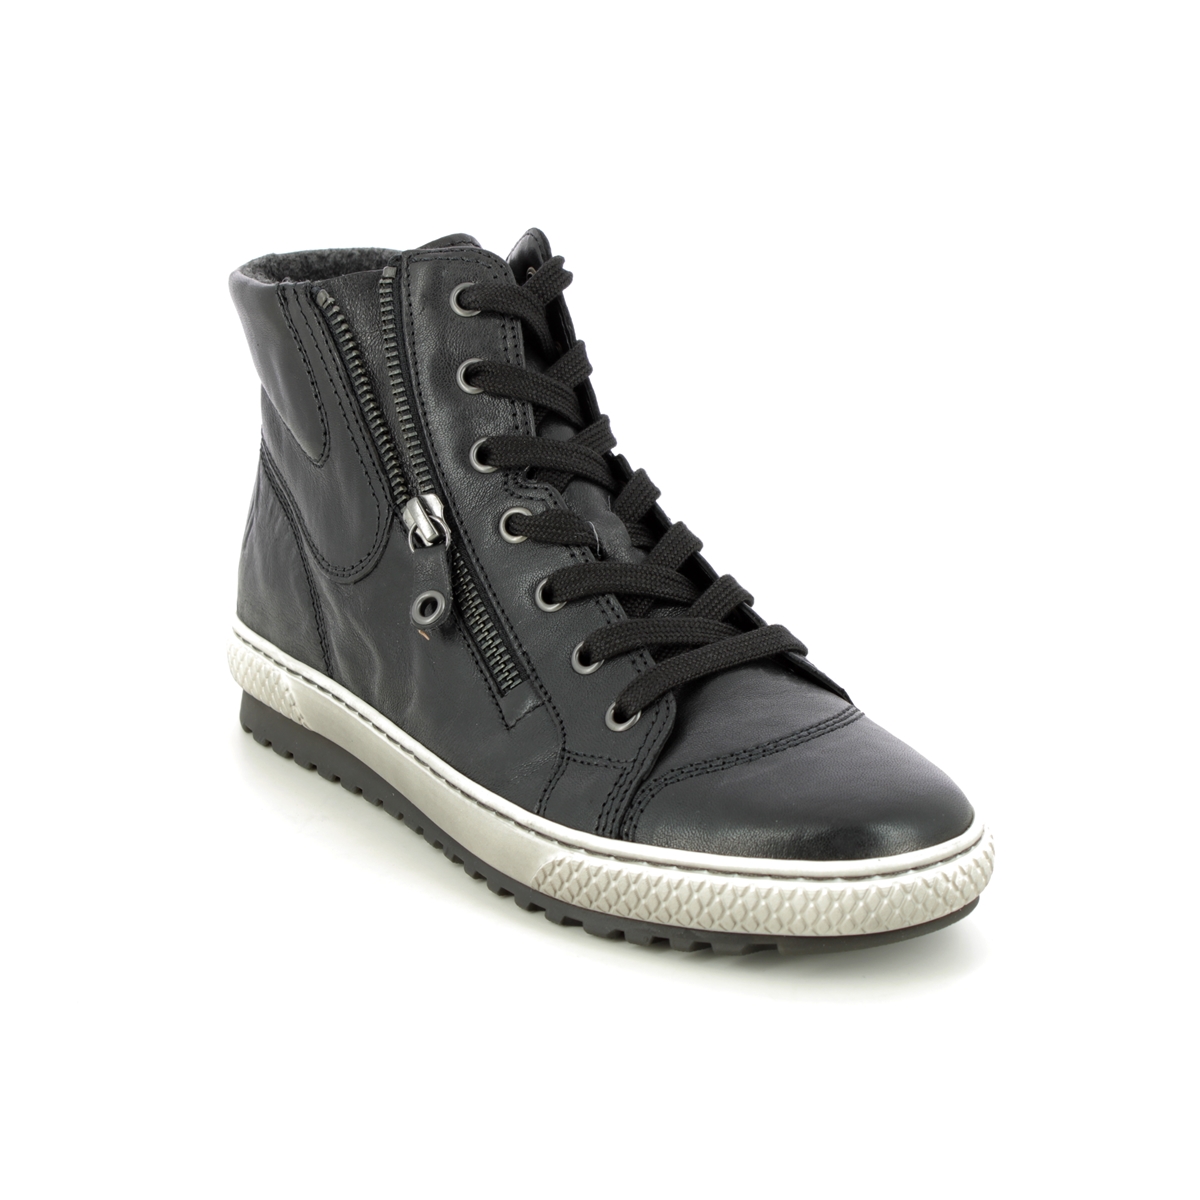 Gabor Bulner Lace Zip Black leather Womens Hi Tops 93.754.57 in a Plain Leather in Size 4.5